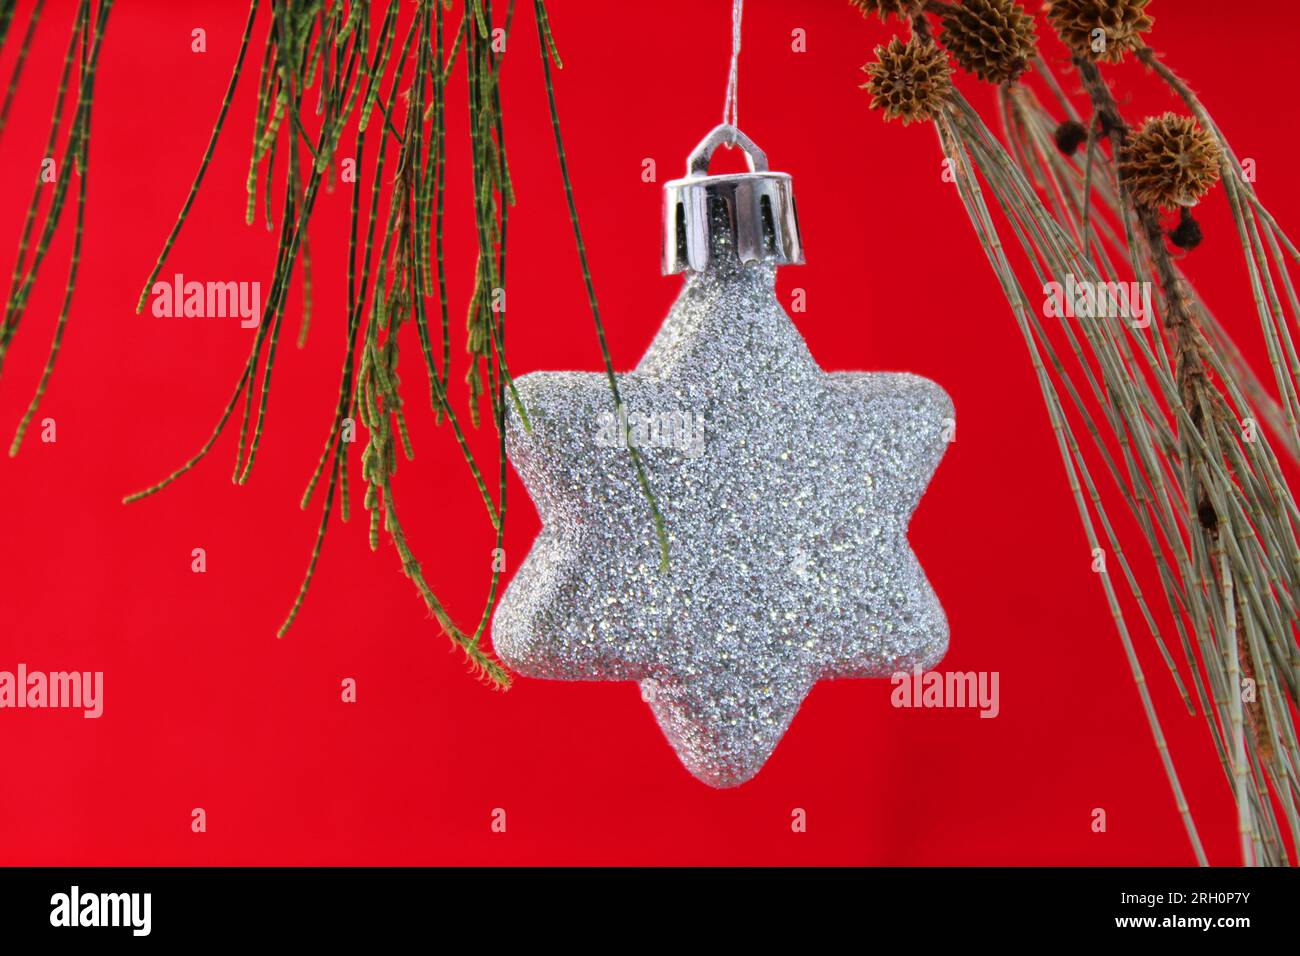 Pine branch with glitter star and red background Stock Photo